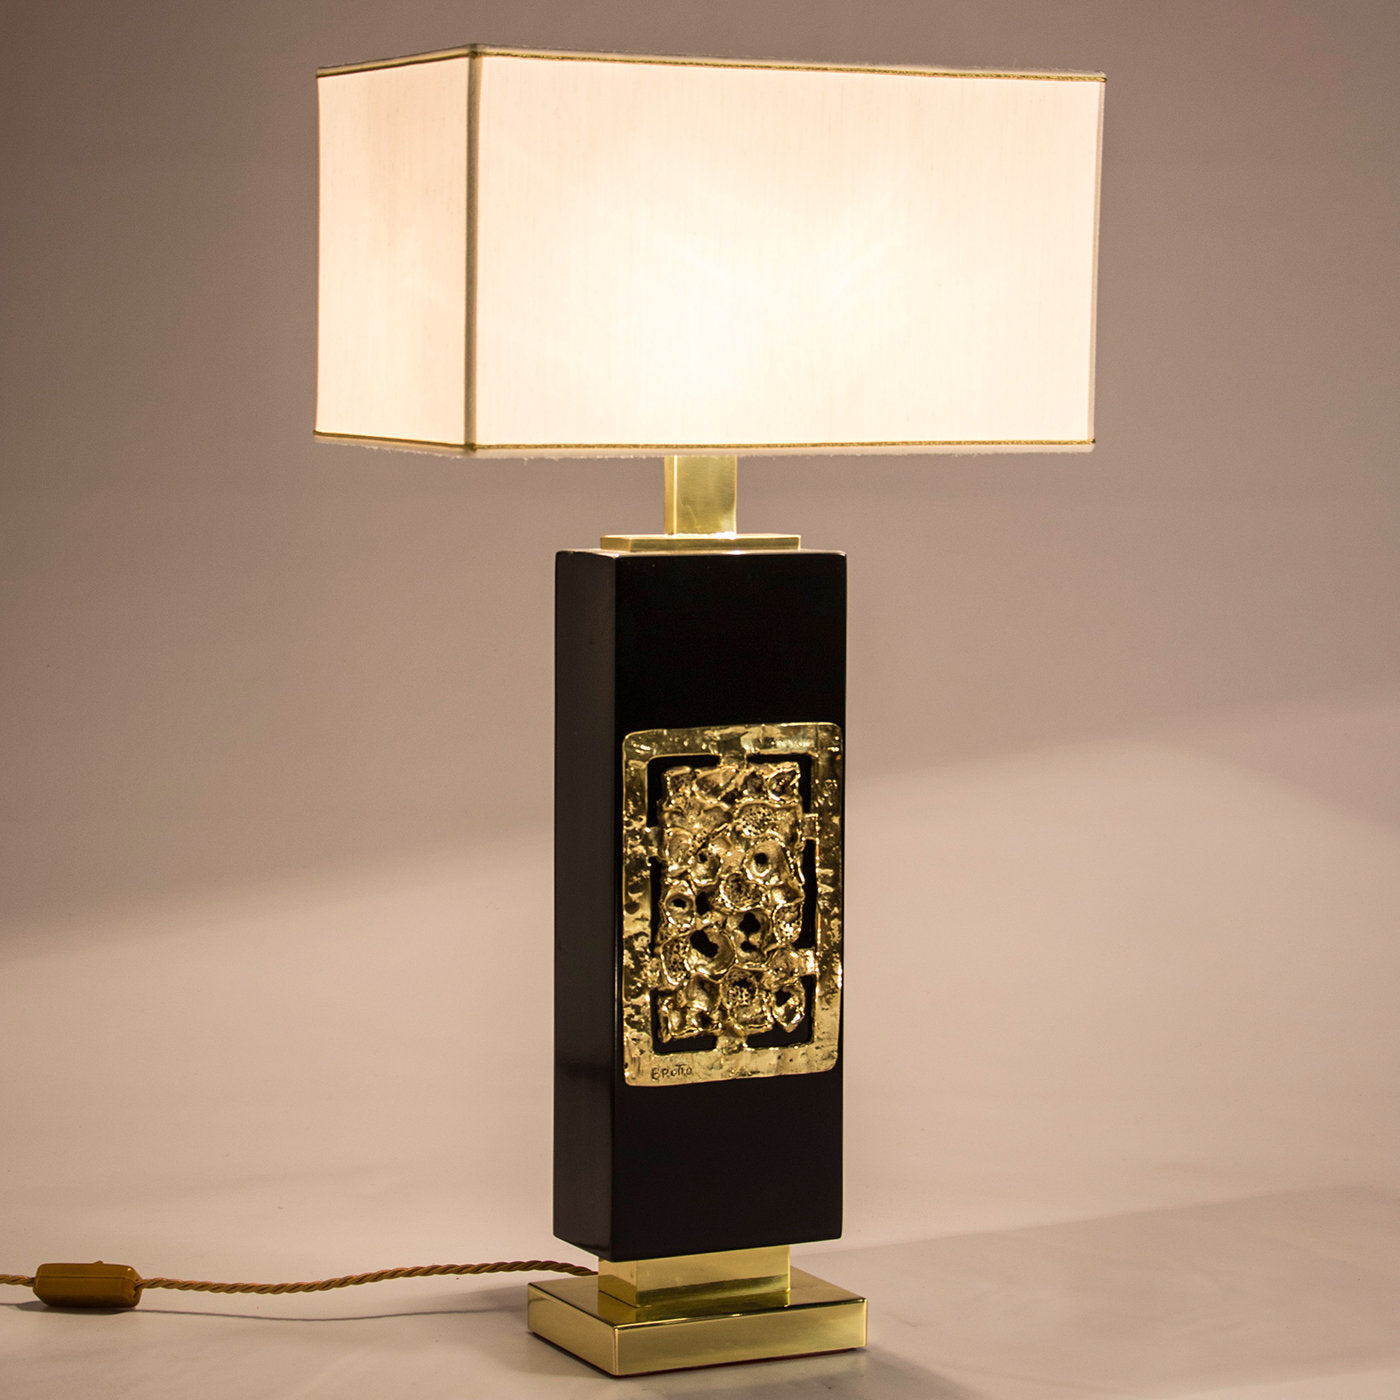 Diomede Table Lamp - Alternative view 1